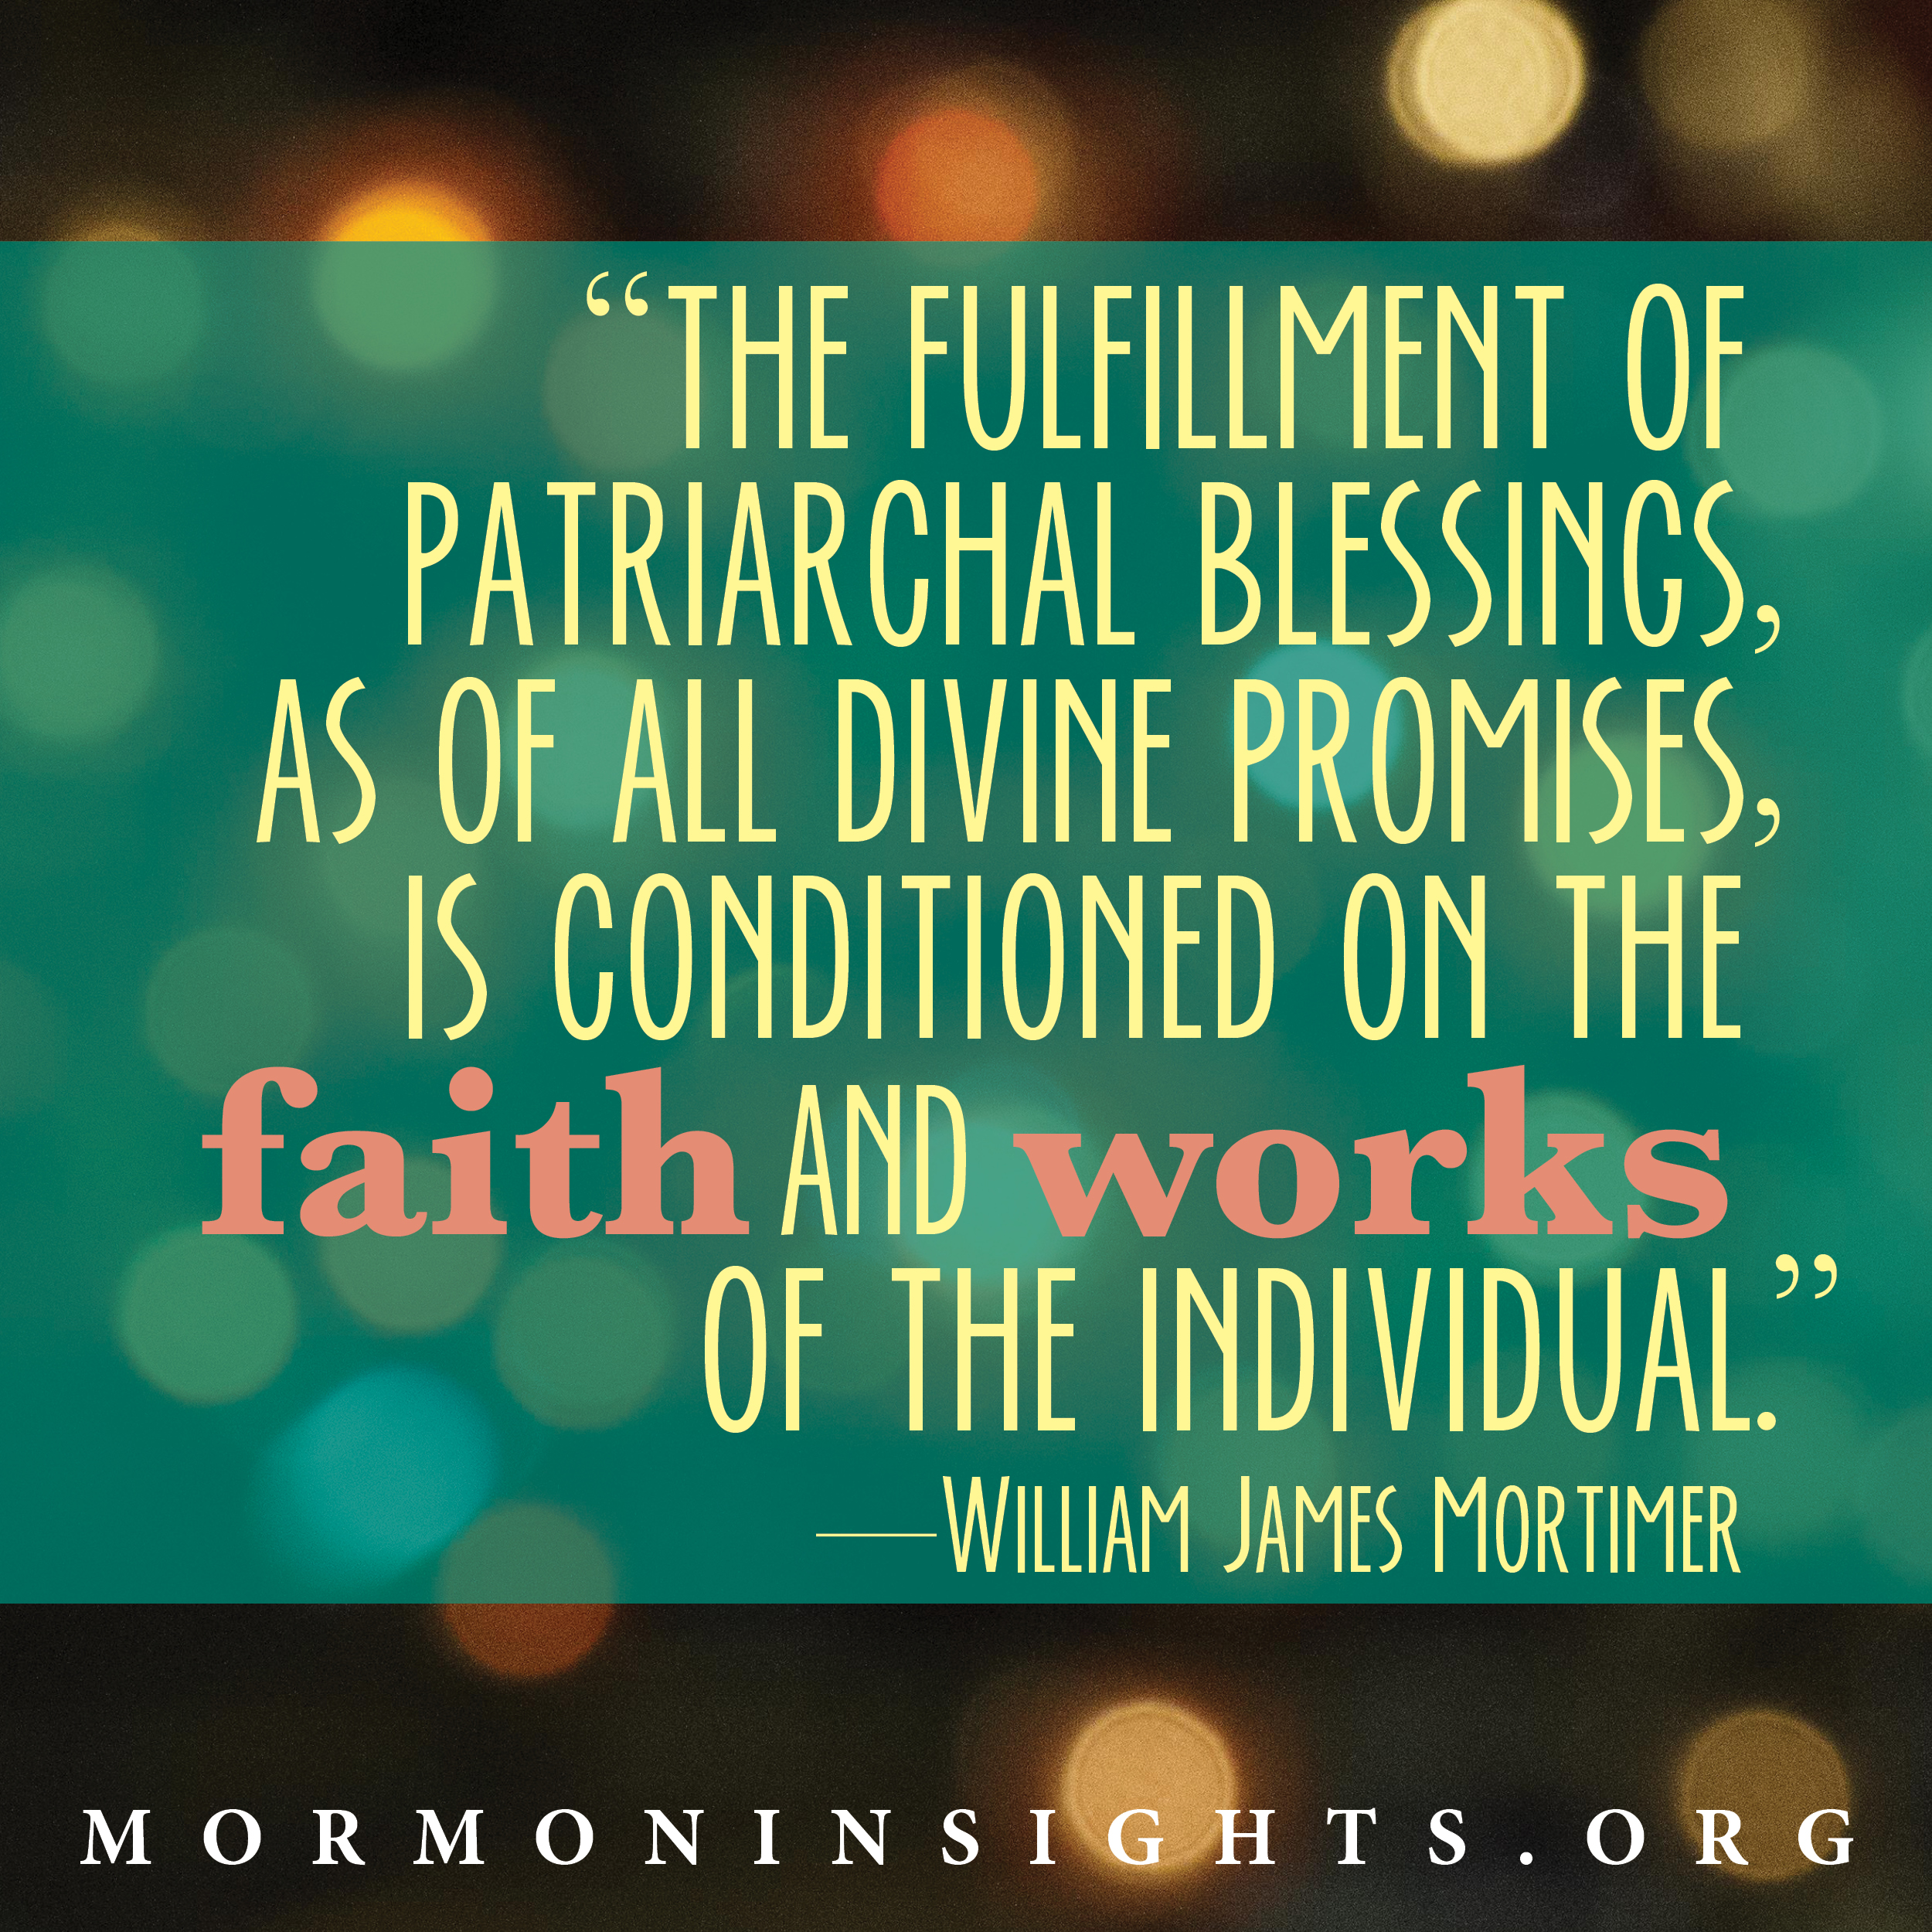 "The fulfillment of Patriarchal blessings, as of all divine promises, is conditioned on the faith and works of the individual."- William